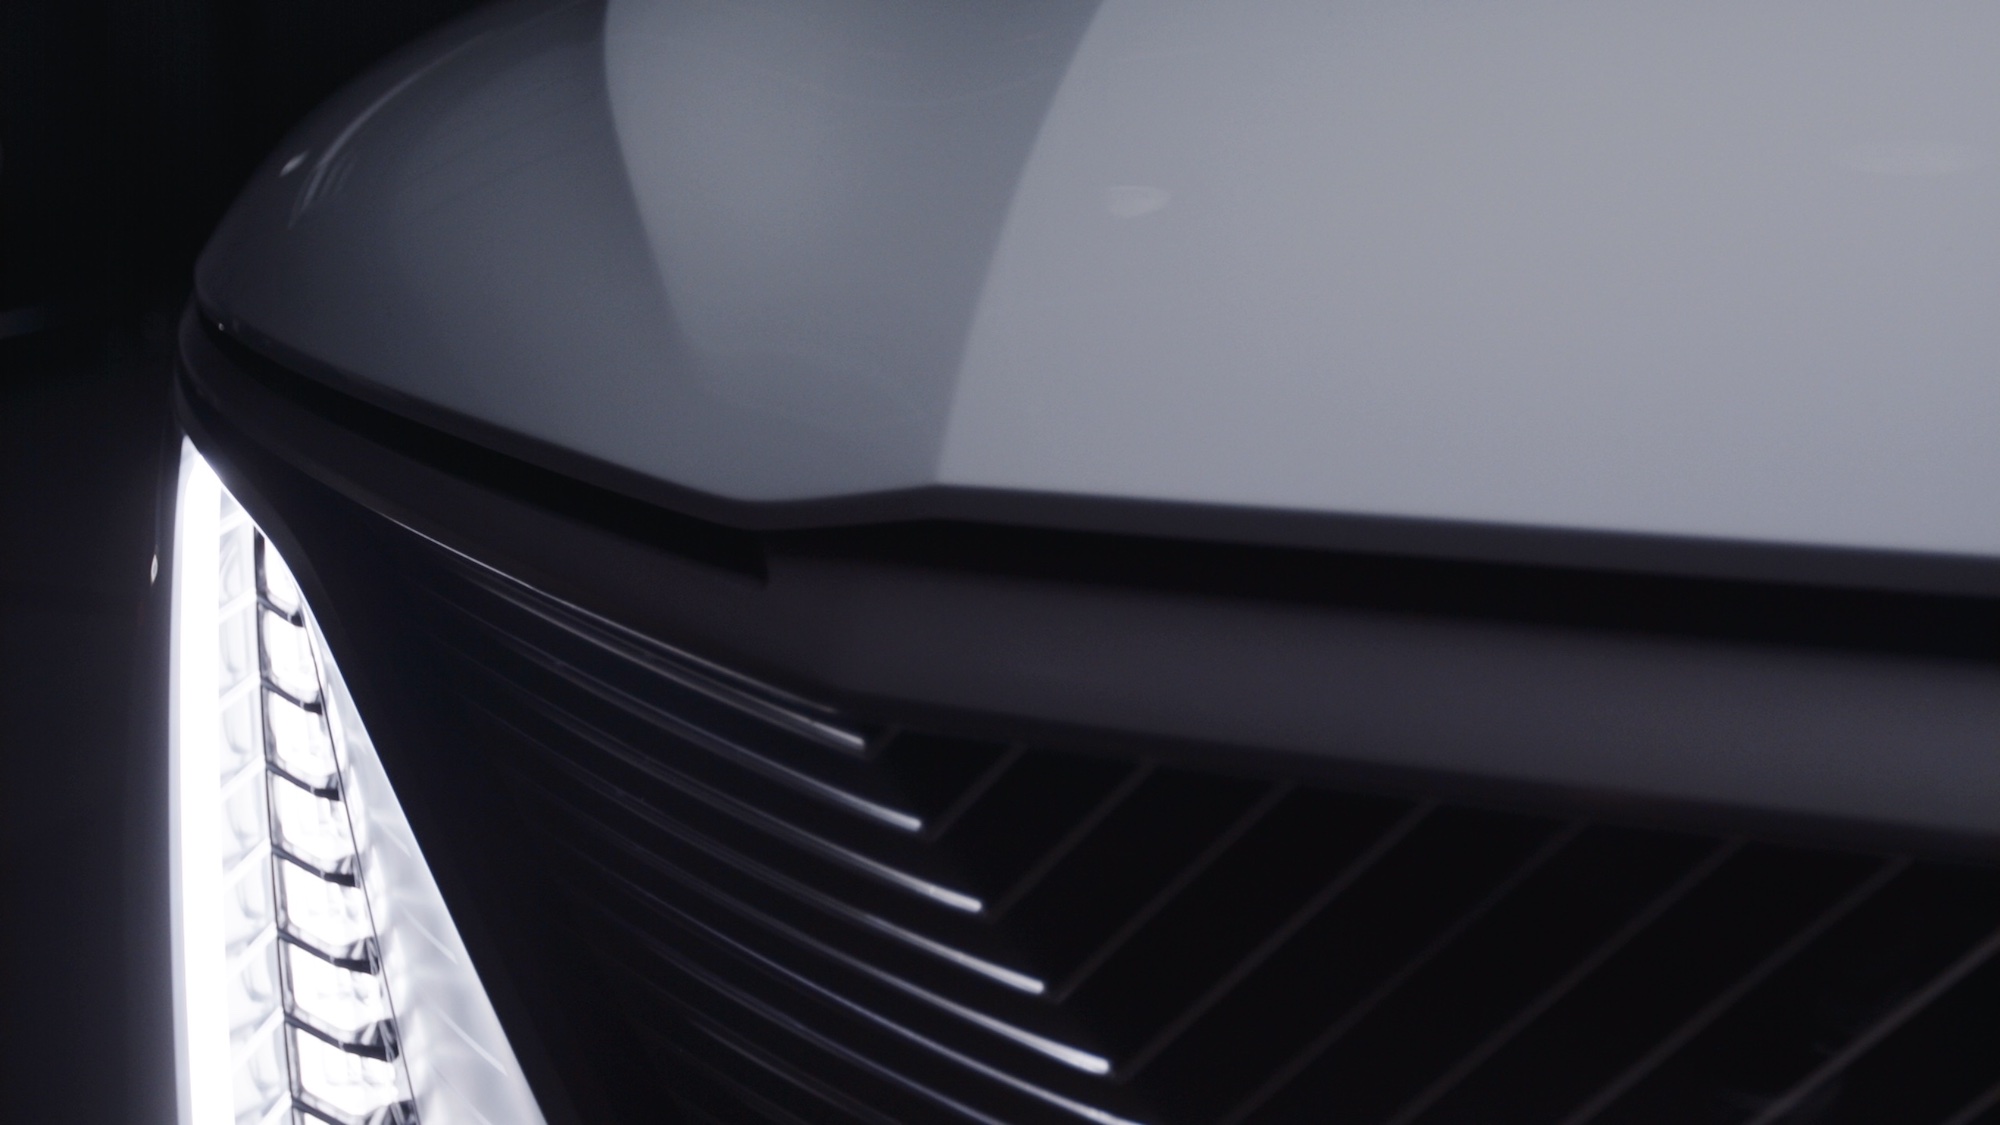 The upcoming Cadillac Celestiq EV's partial front end and passenger-side headlight